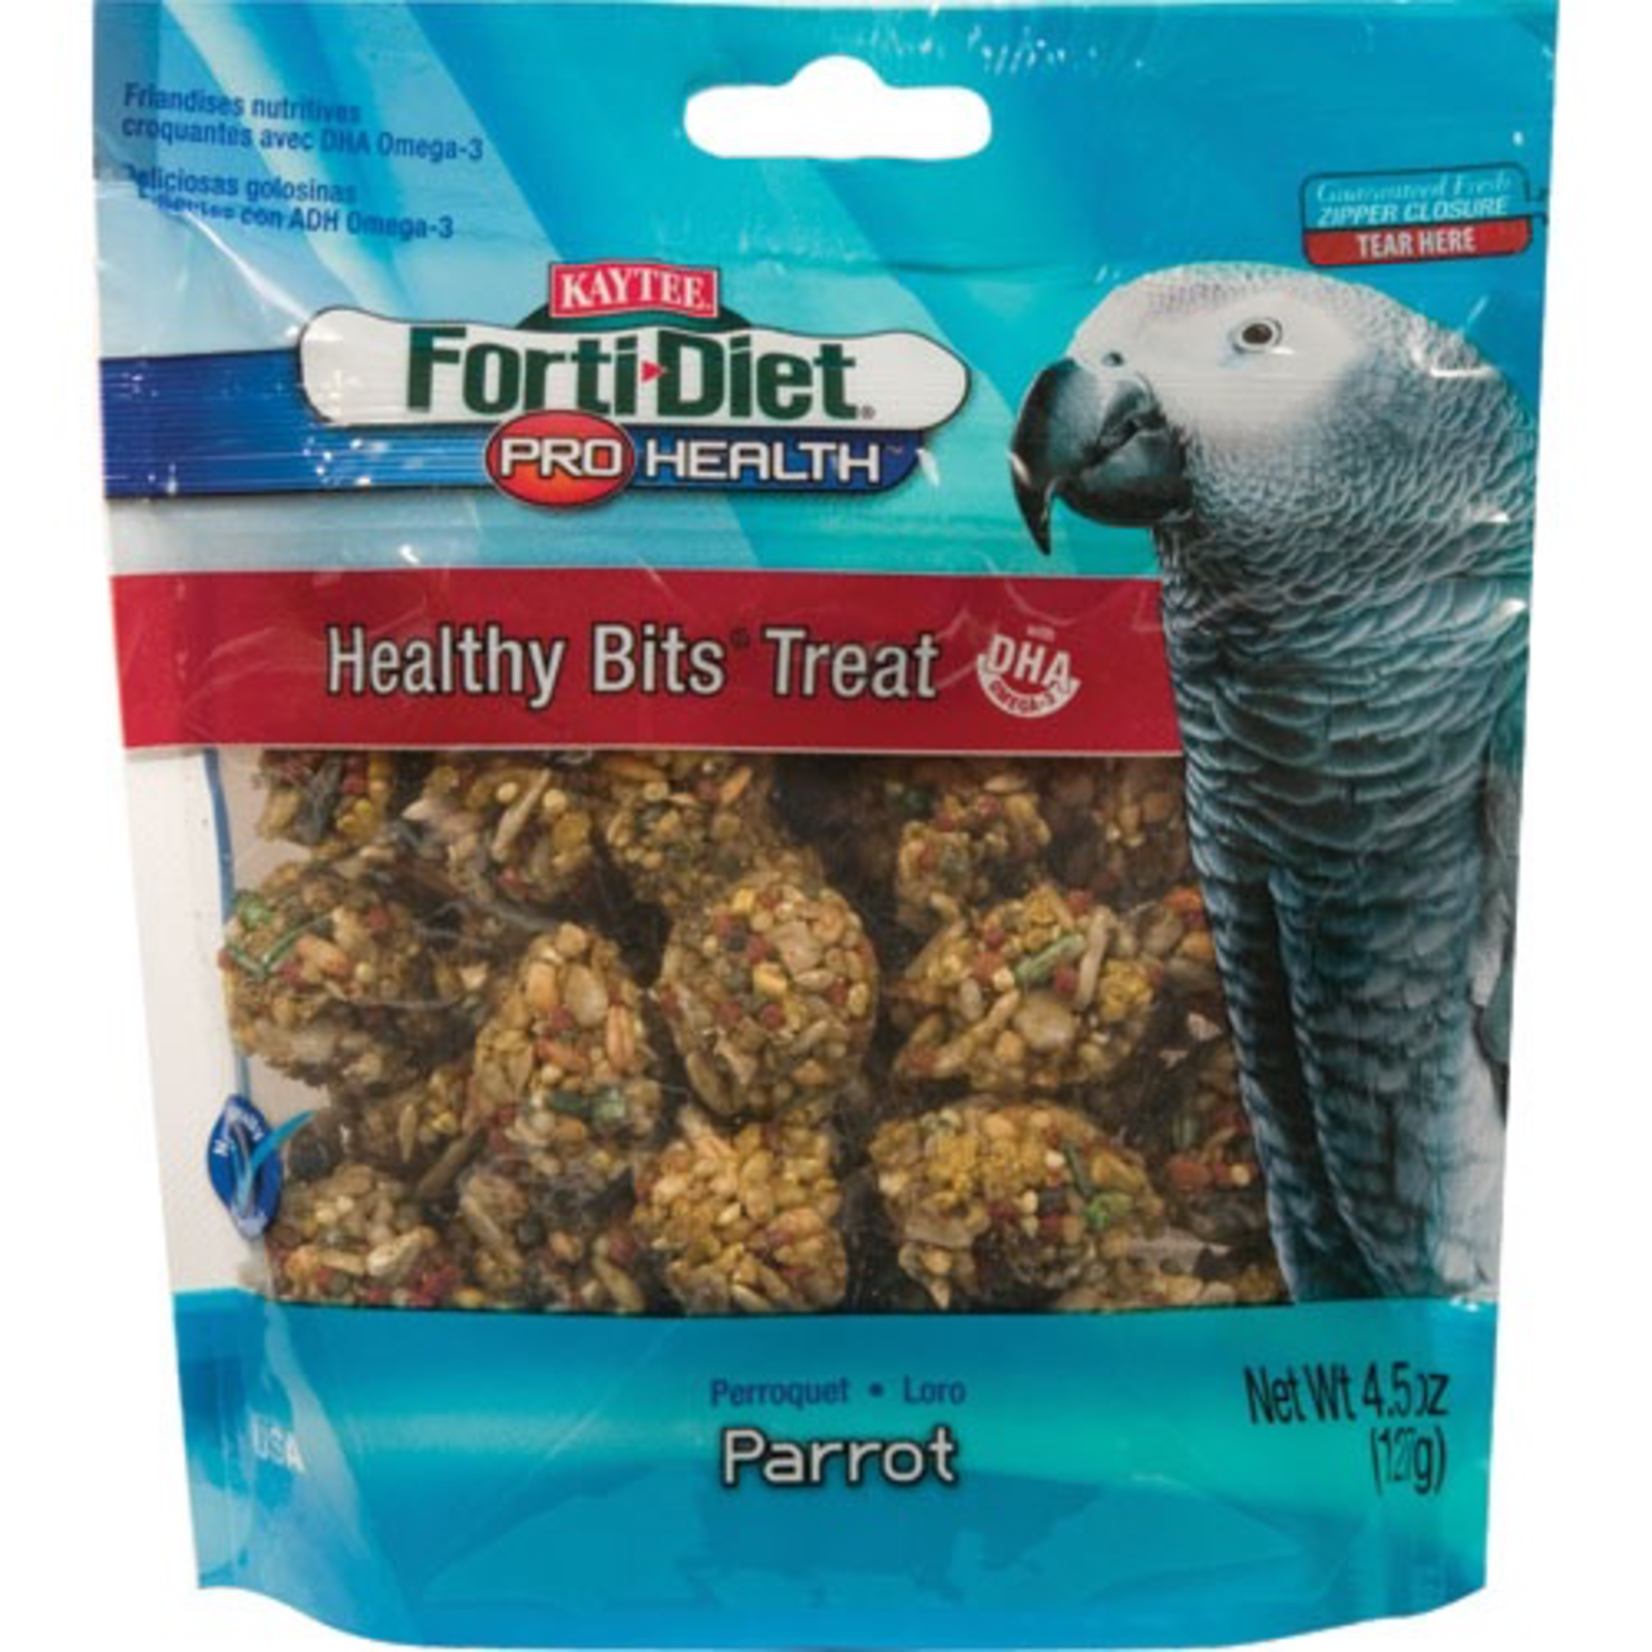 KAYTEE Forti-Diet Pro Health Healthy Bits Treats for Parrots - 4.75 oz